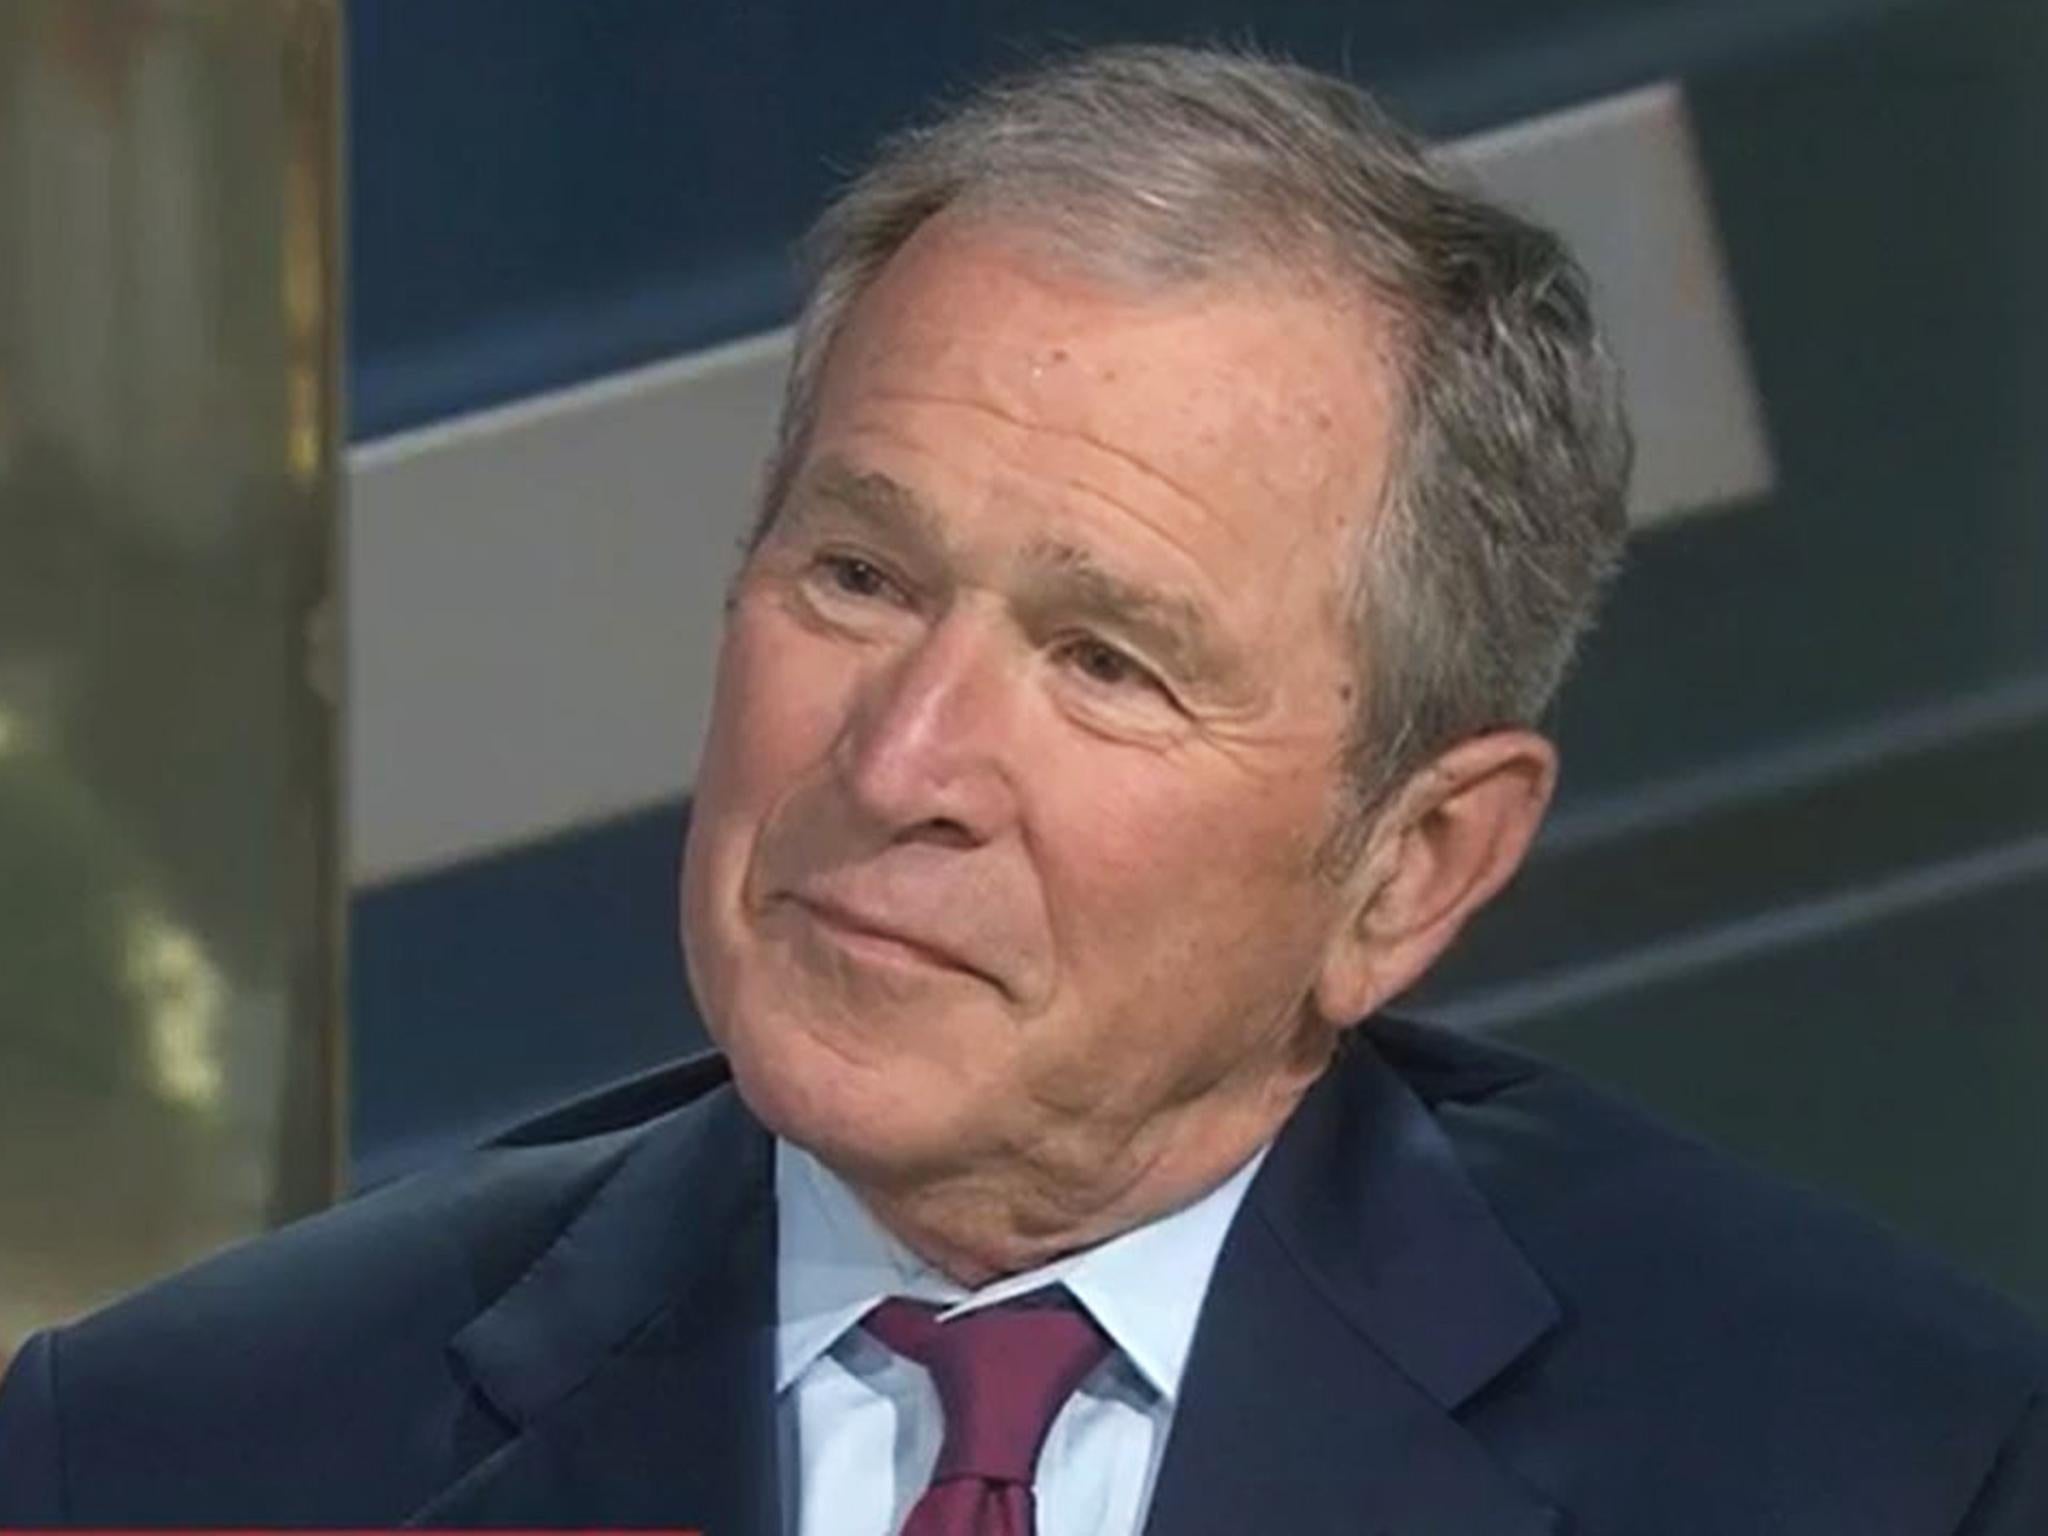 Mr Bush has generally refrained from criticising Mr Trump